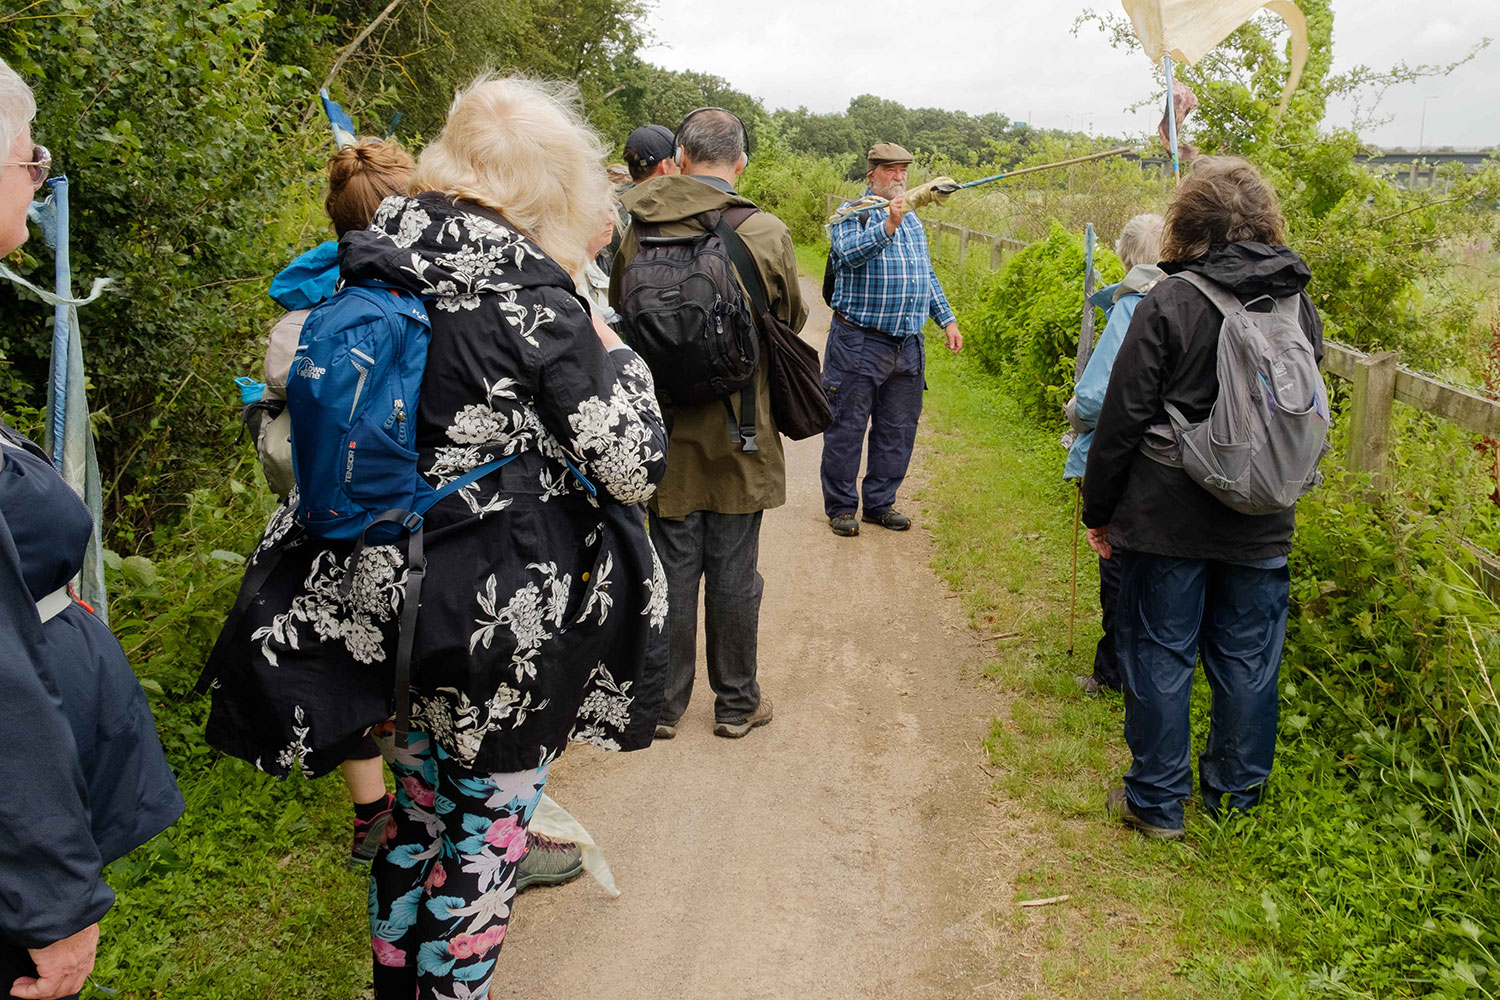 Stephen Green talks about the area to a group of walkers stopped on a green lane